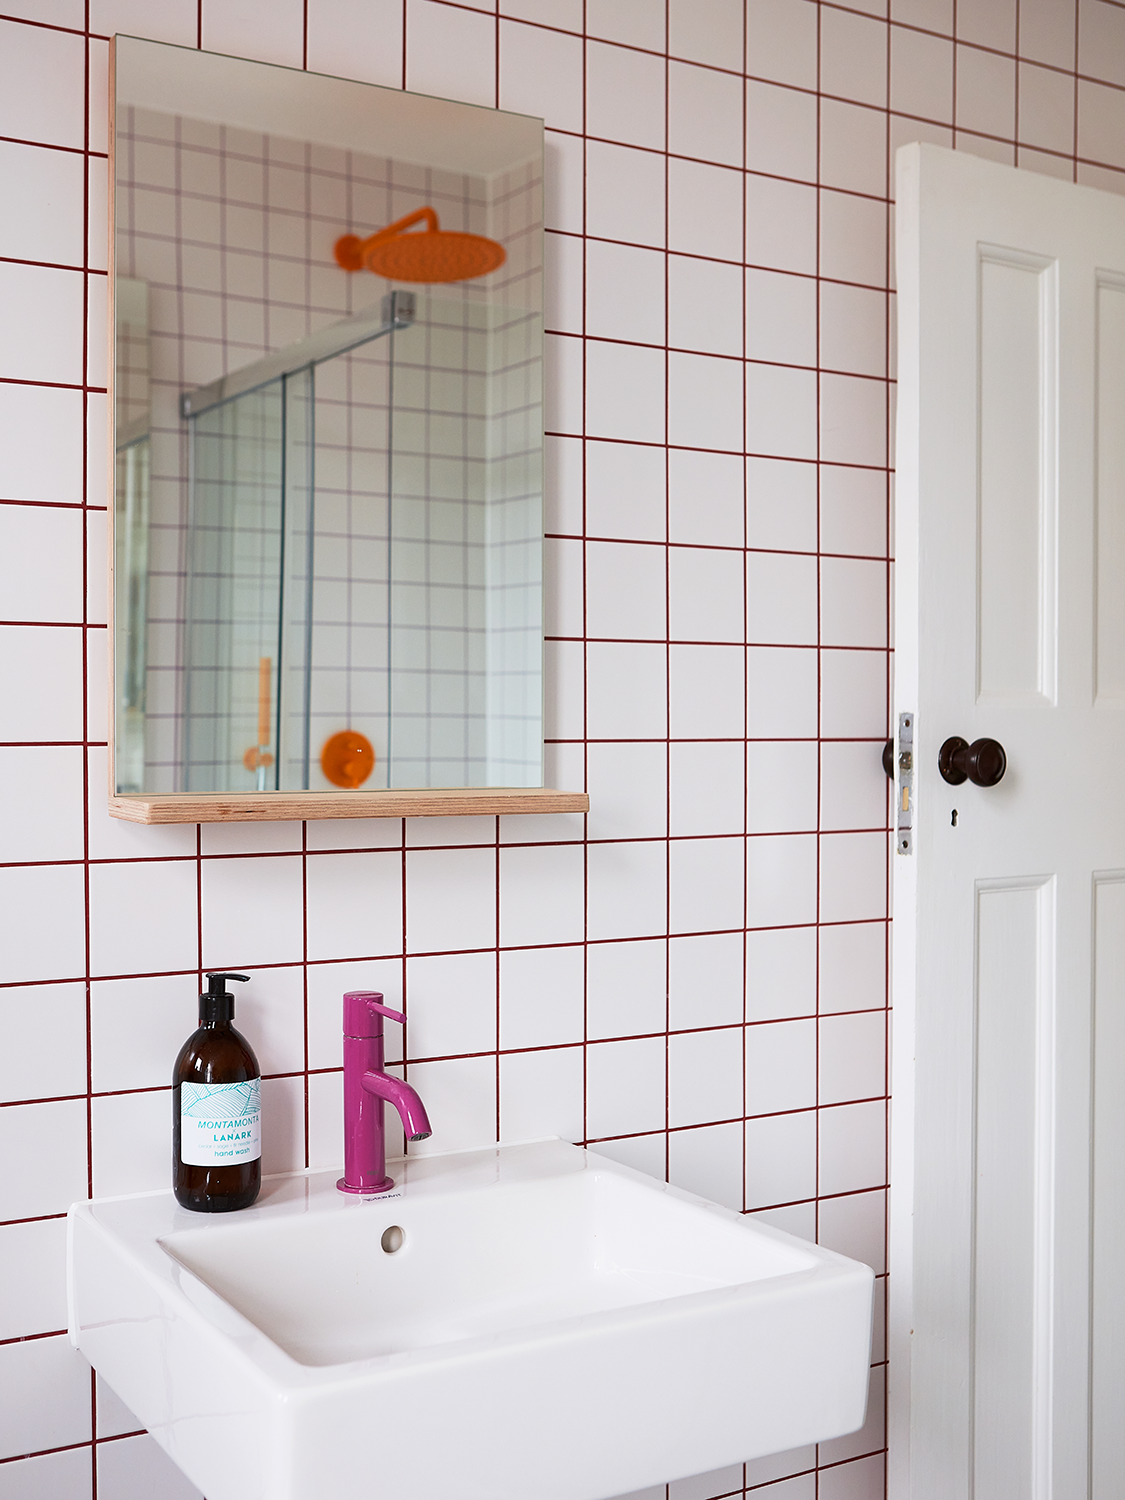 Purple Grout and a Mango Showerhead Infuse This Shared Family Bathroom With Fun